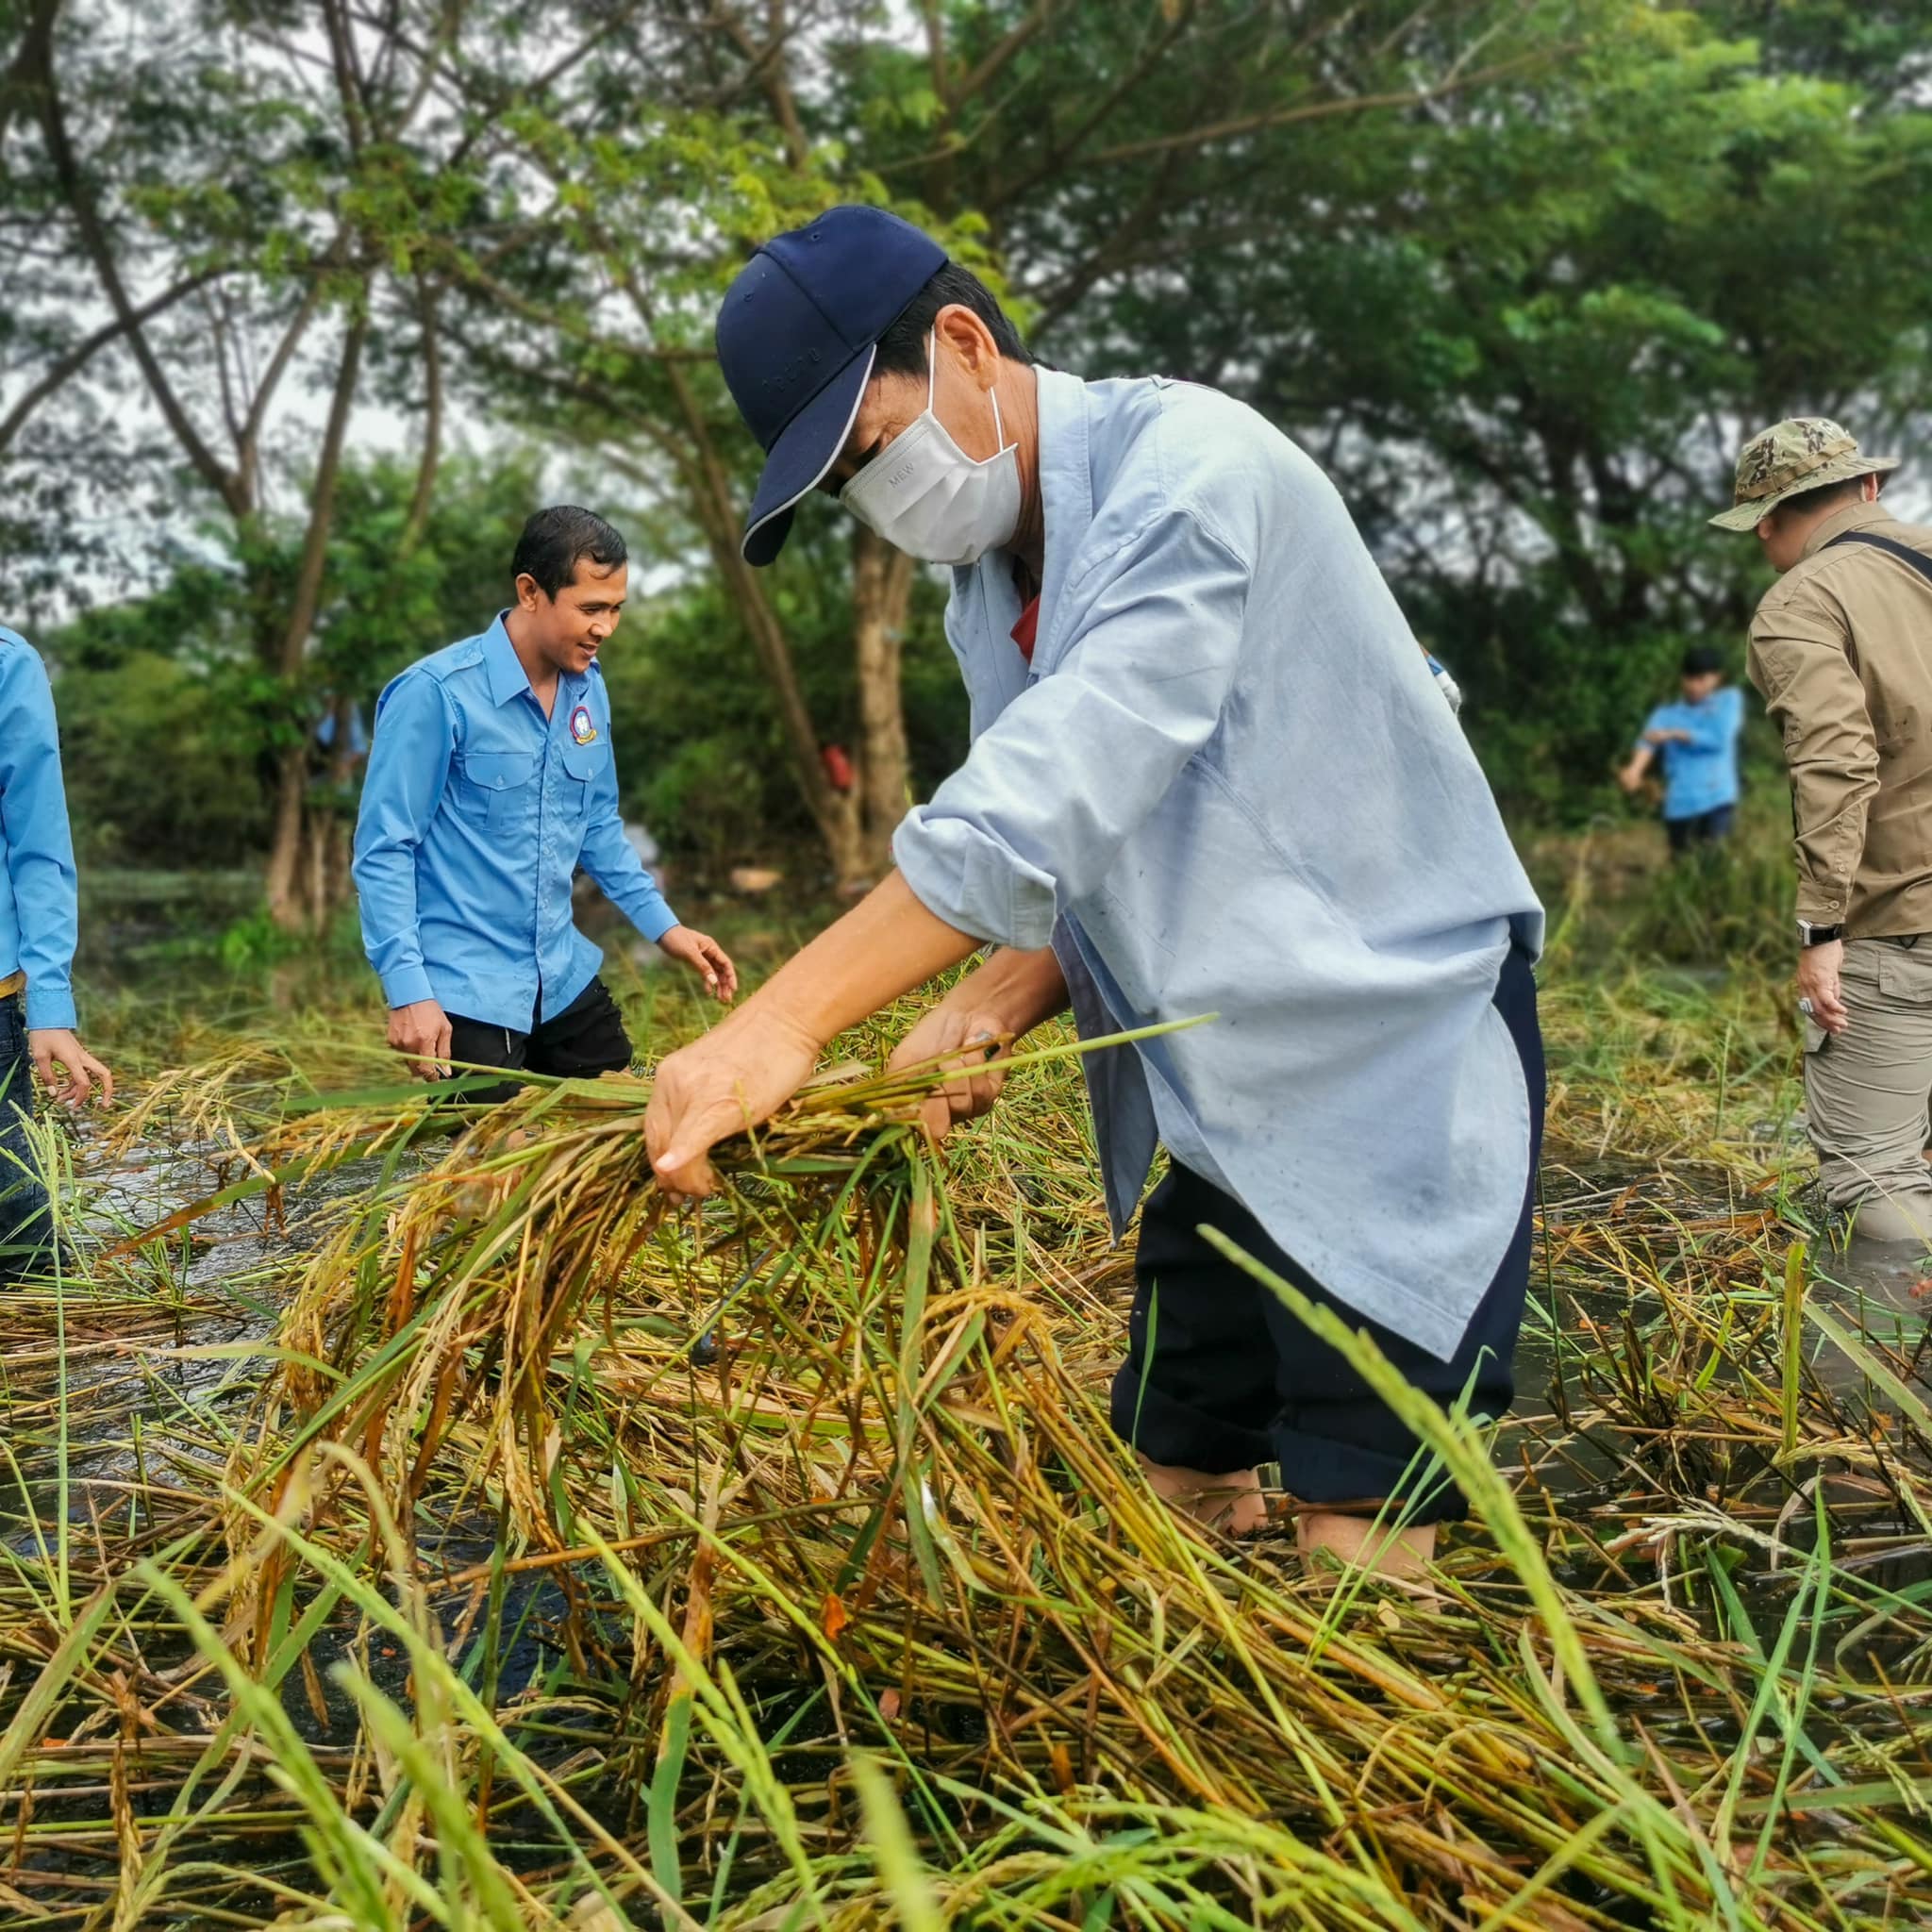 Helping farmers in harvesting the paddy in Khum Sneng, Banon District, Battambang